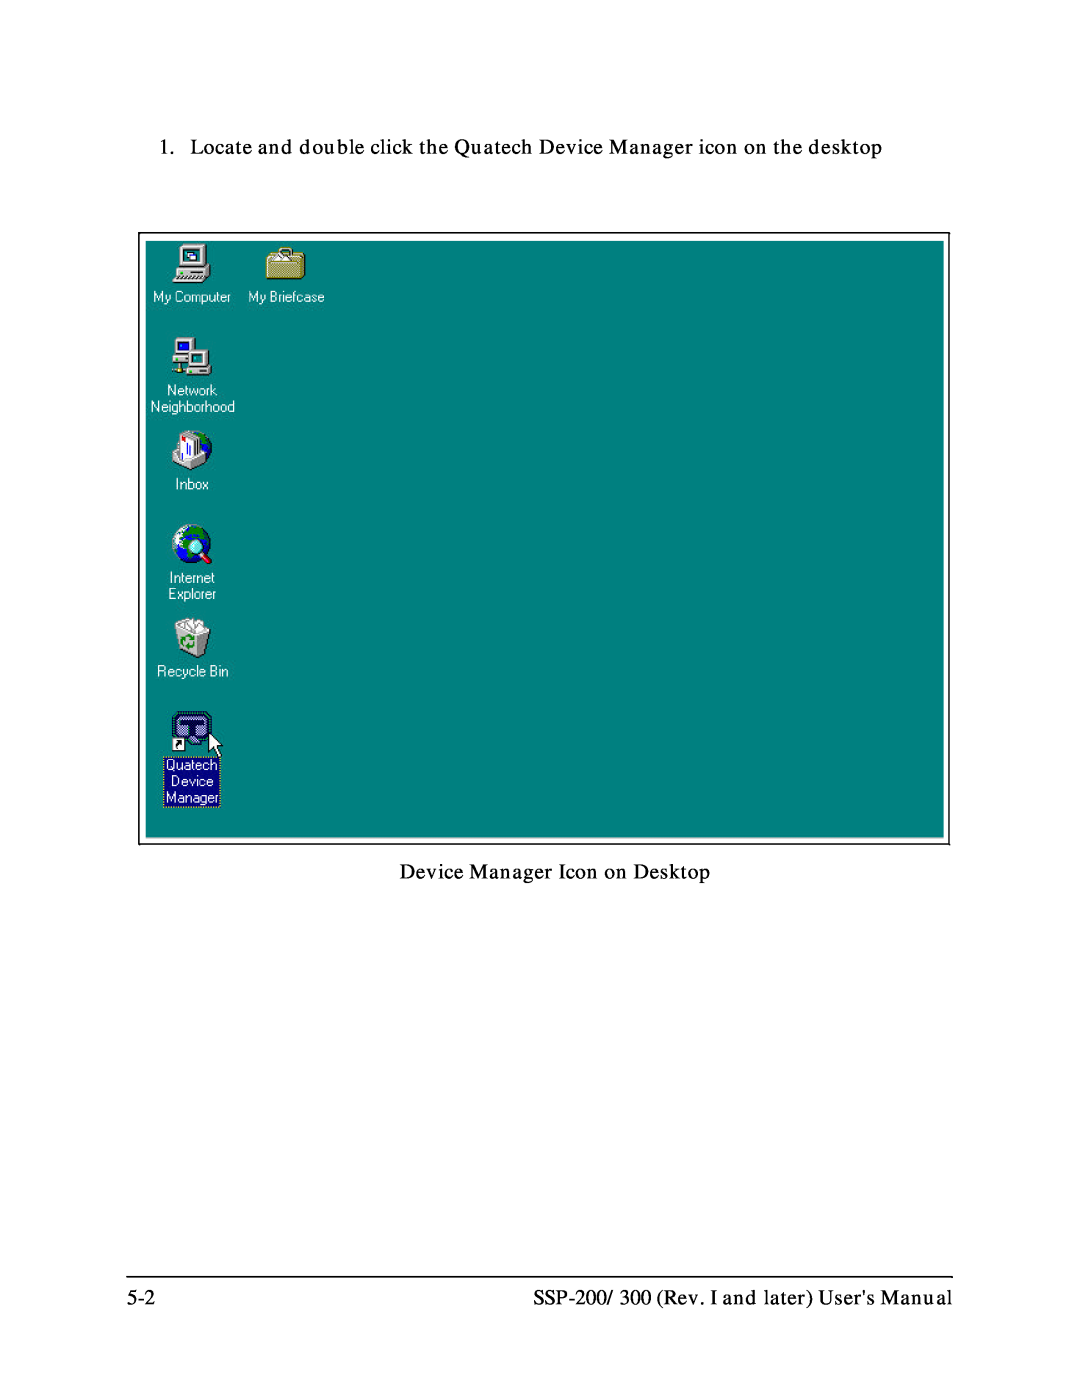 Quatech SSP-200, SSP-300 user manual Device Manager Icon on Desktop 